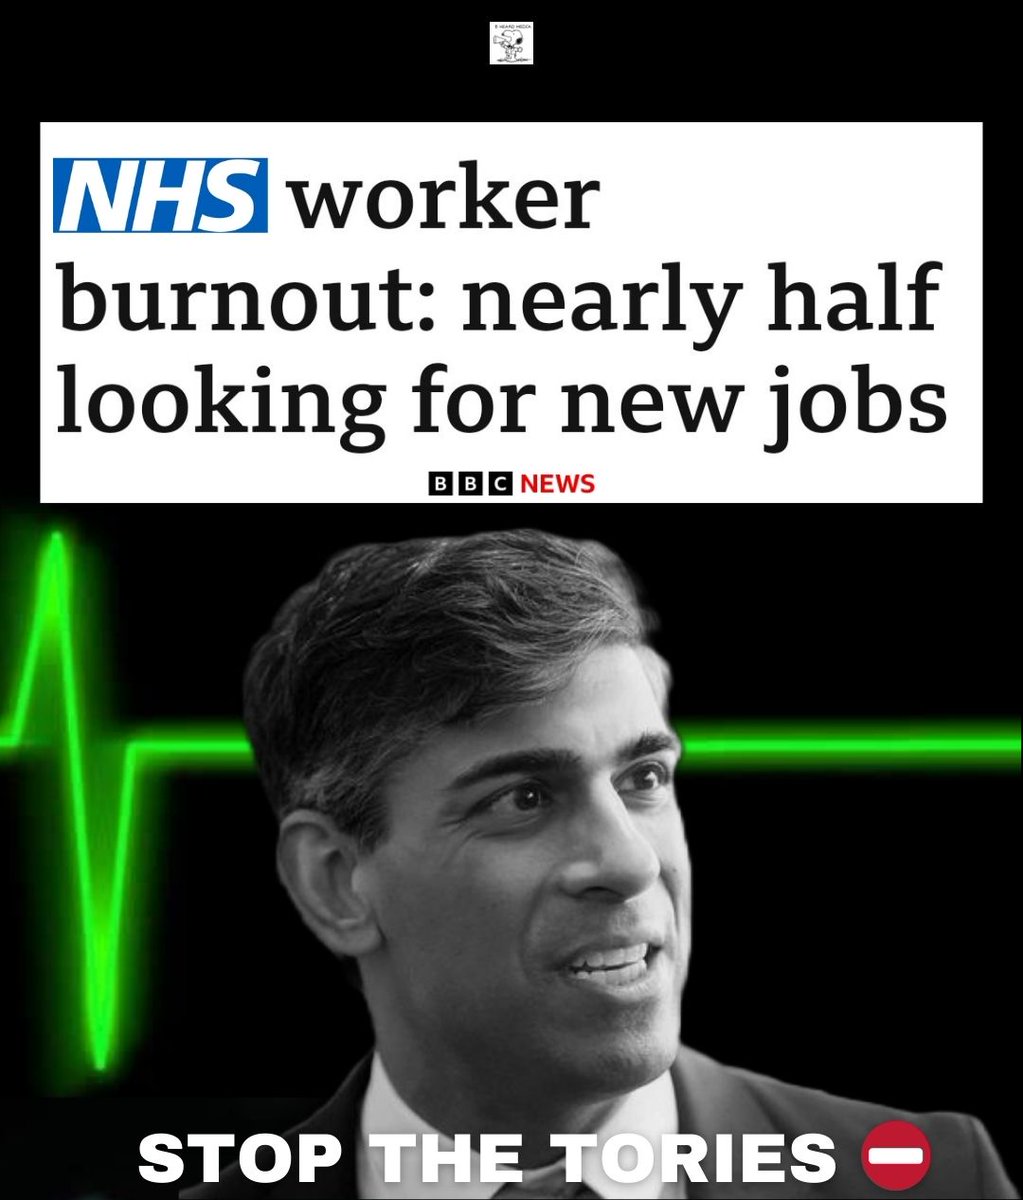 NHS worker burnout: nearly half looking for new jobs..

47% of frontline staff checked job vacancies outside the NHS

The primary motivation was higher pay.

Psychological stress, workload and staff shortages were the other main reasons.

#SaveOurNHS
#StopTheTories
#FairPayForNHS